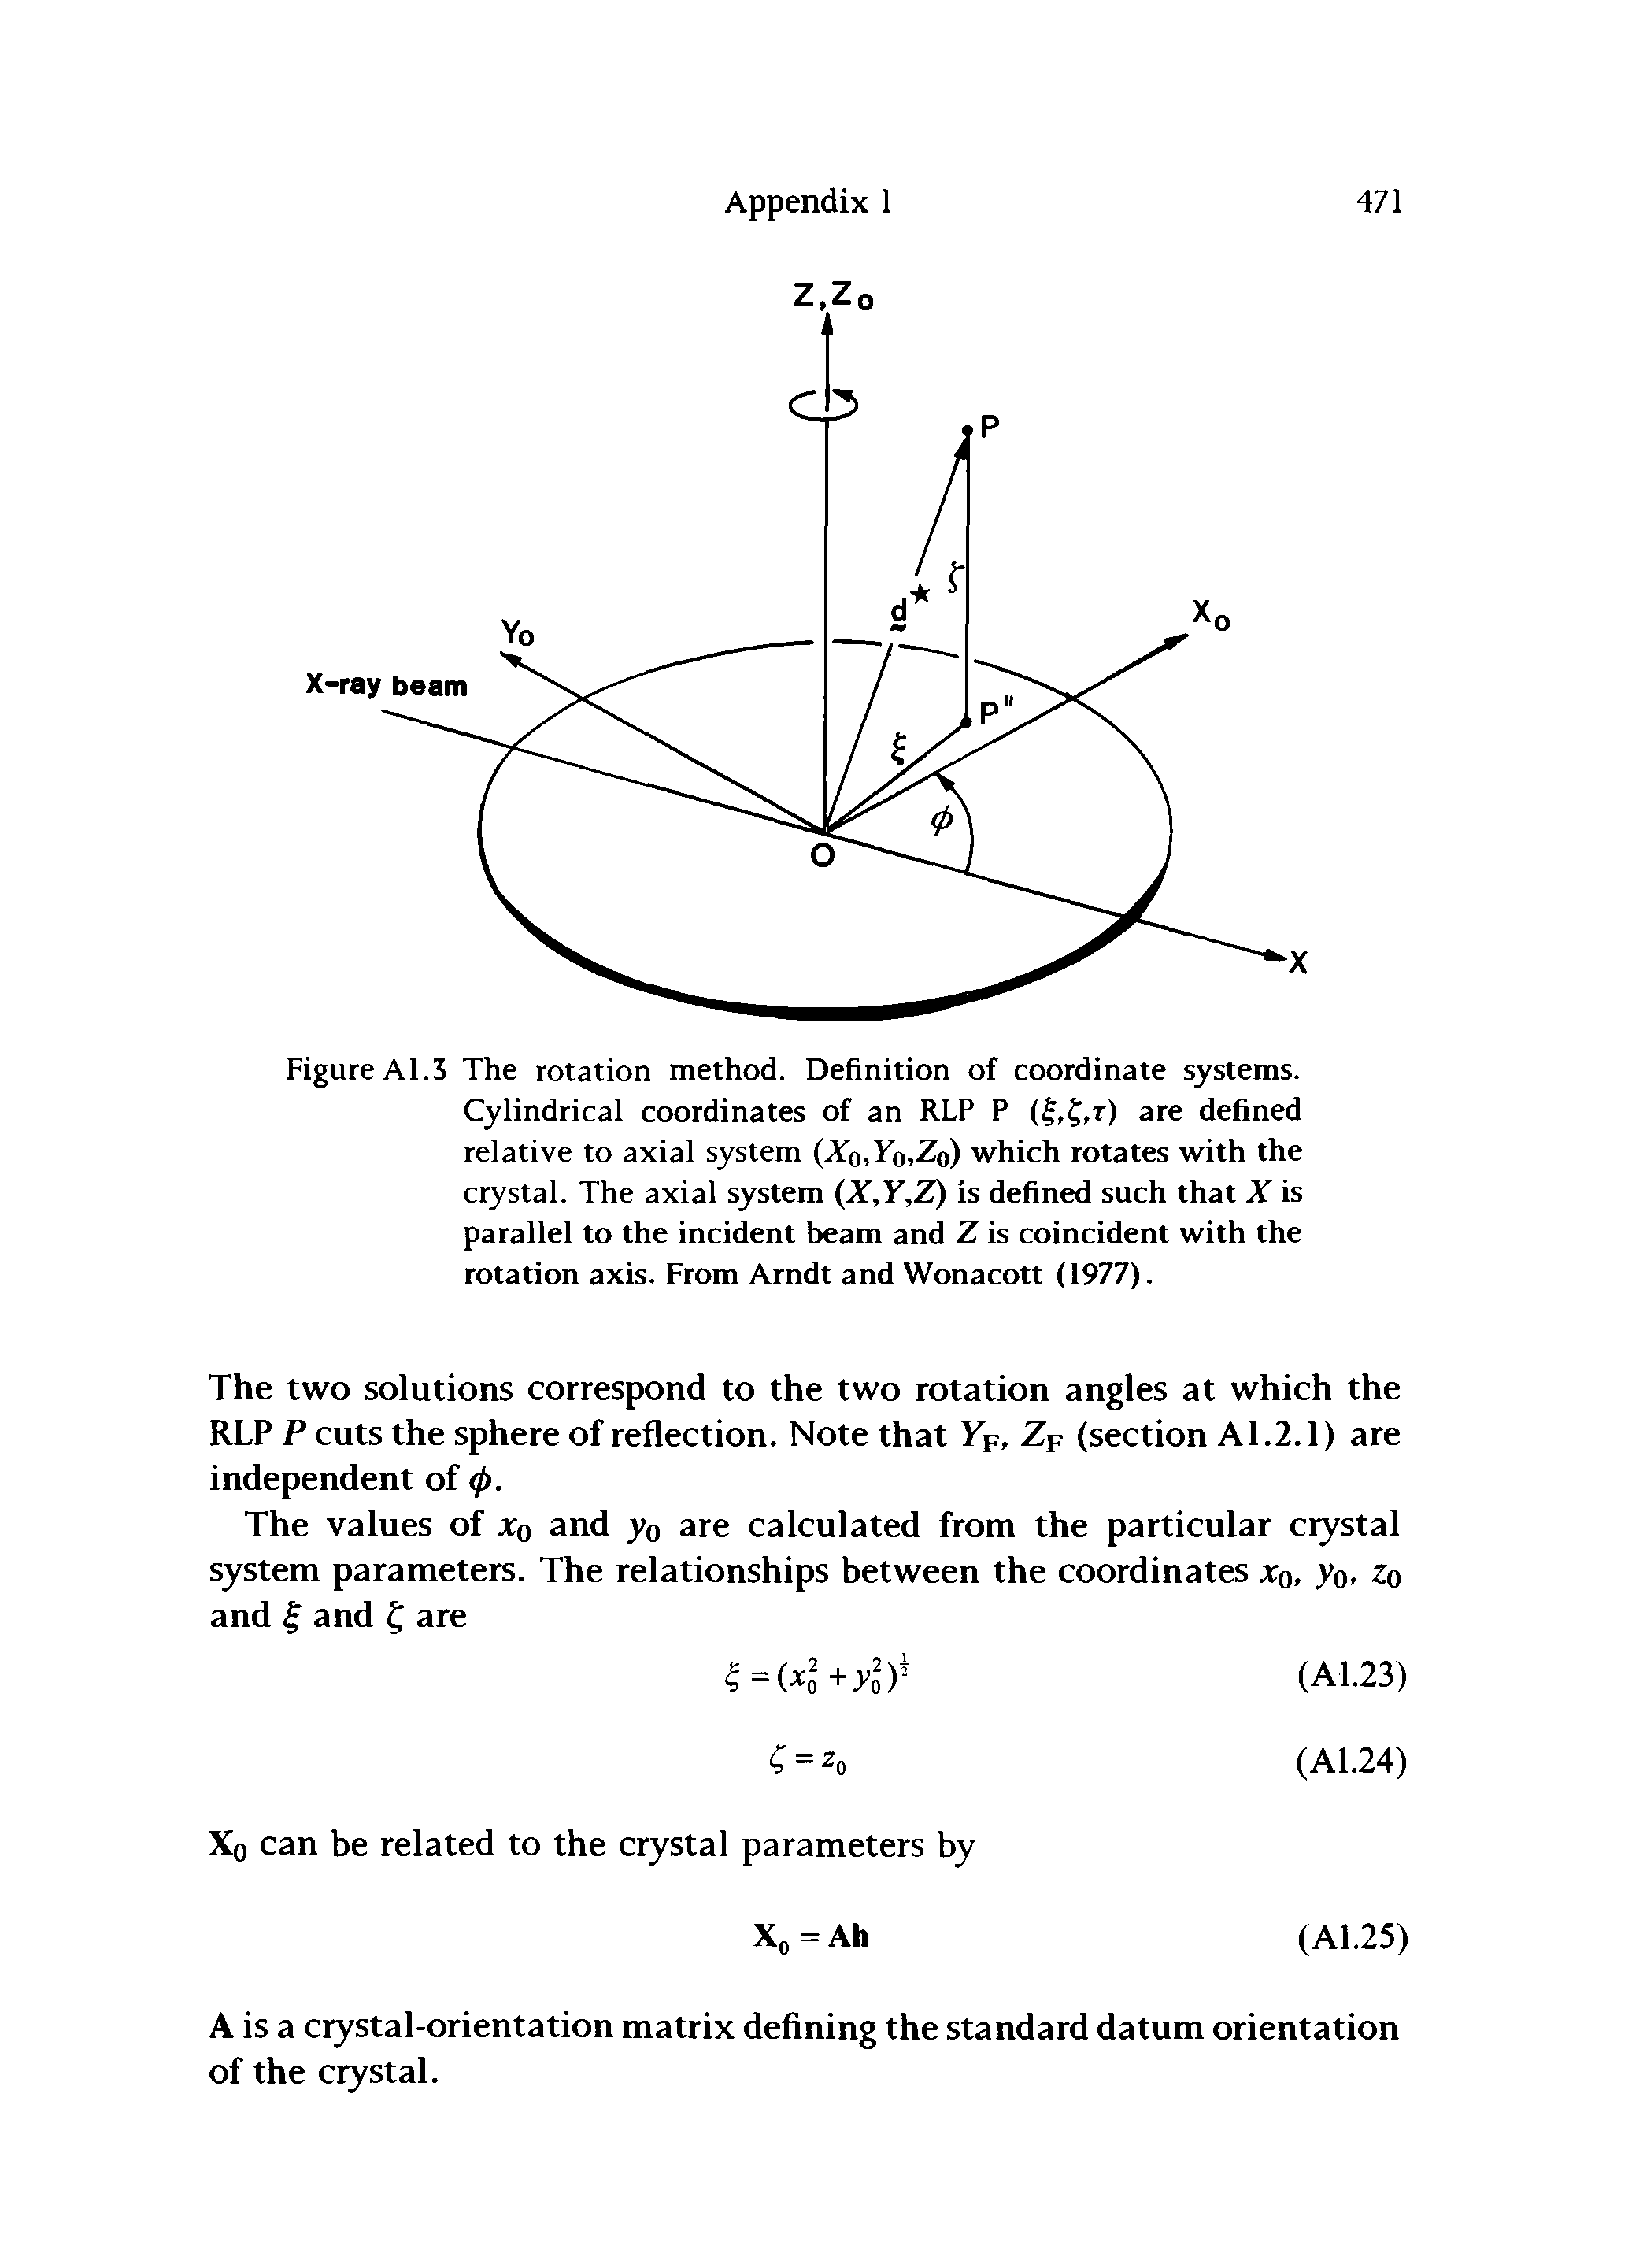 Figure Al.3 The rotation method. Definition of coordinate systems.